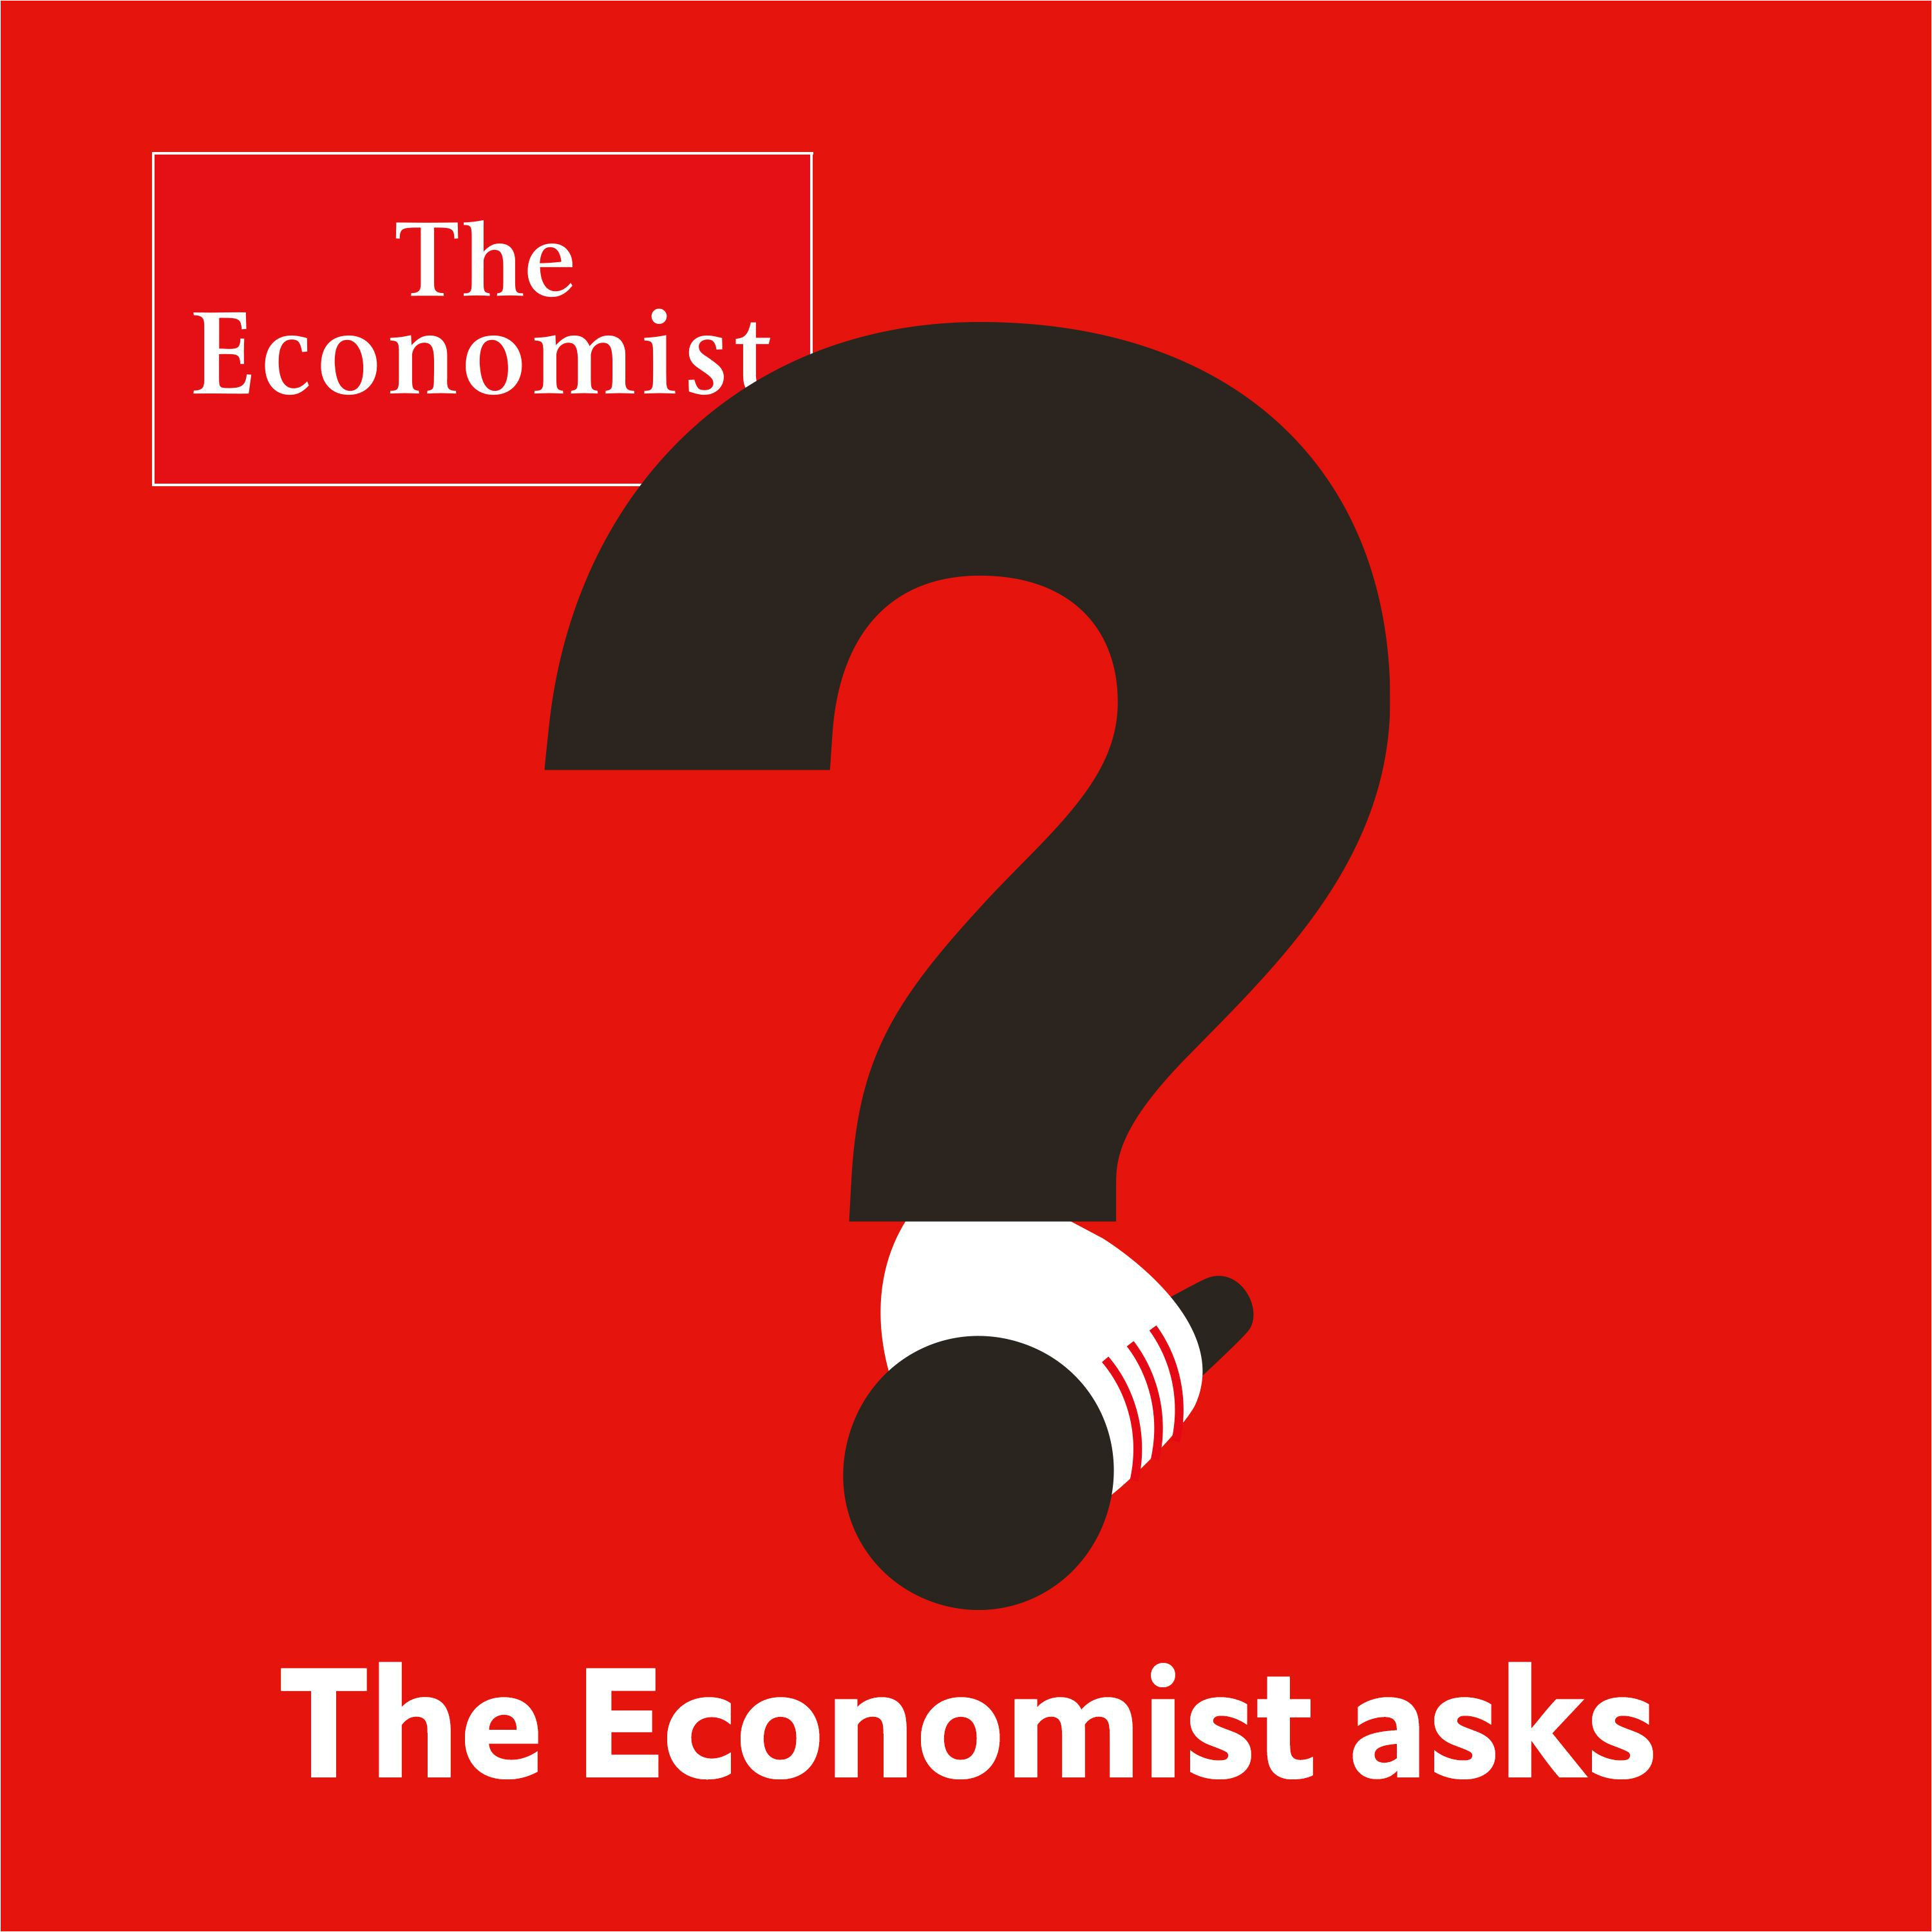 the economist asks can america remain the world s biggest economic power